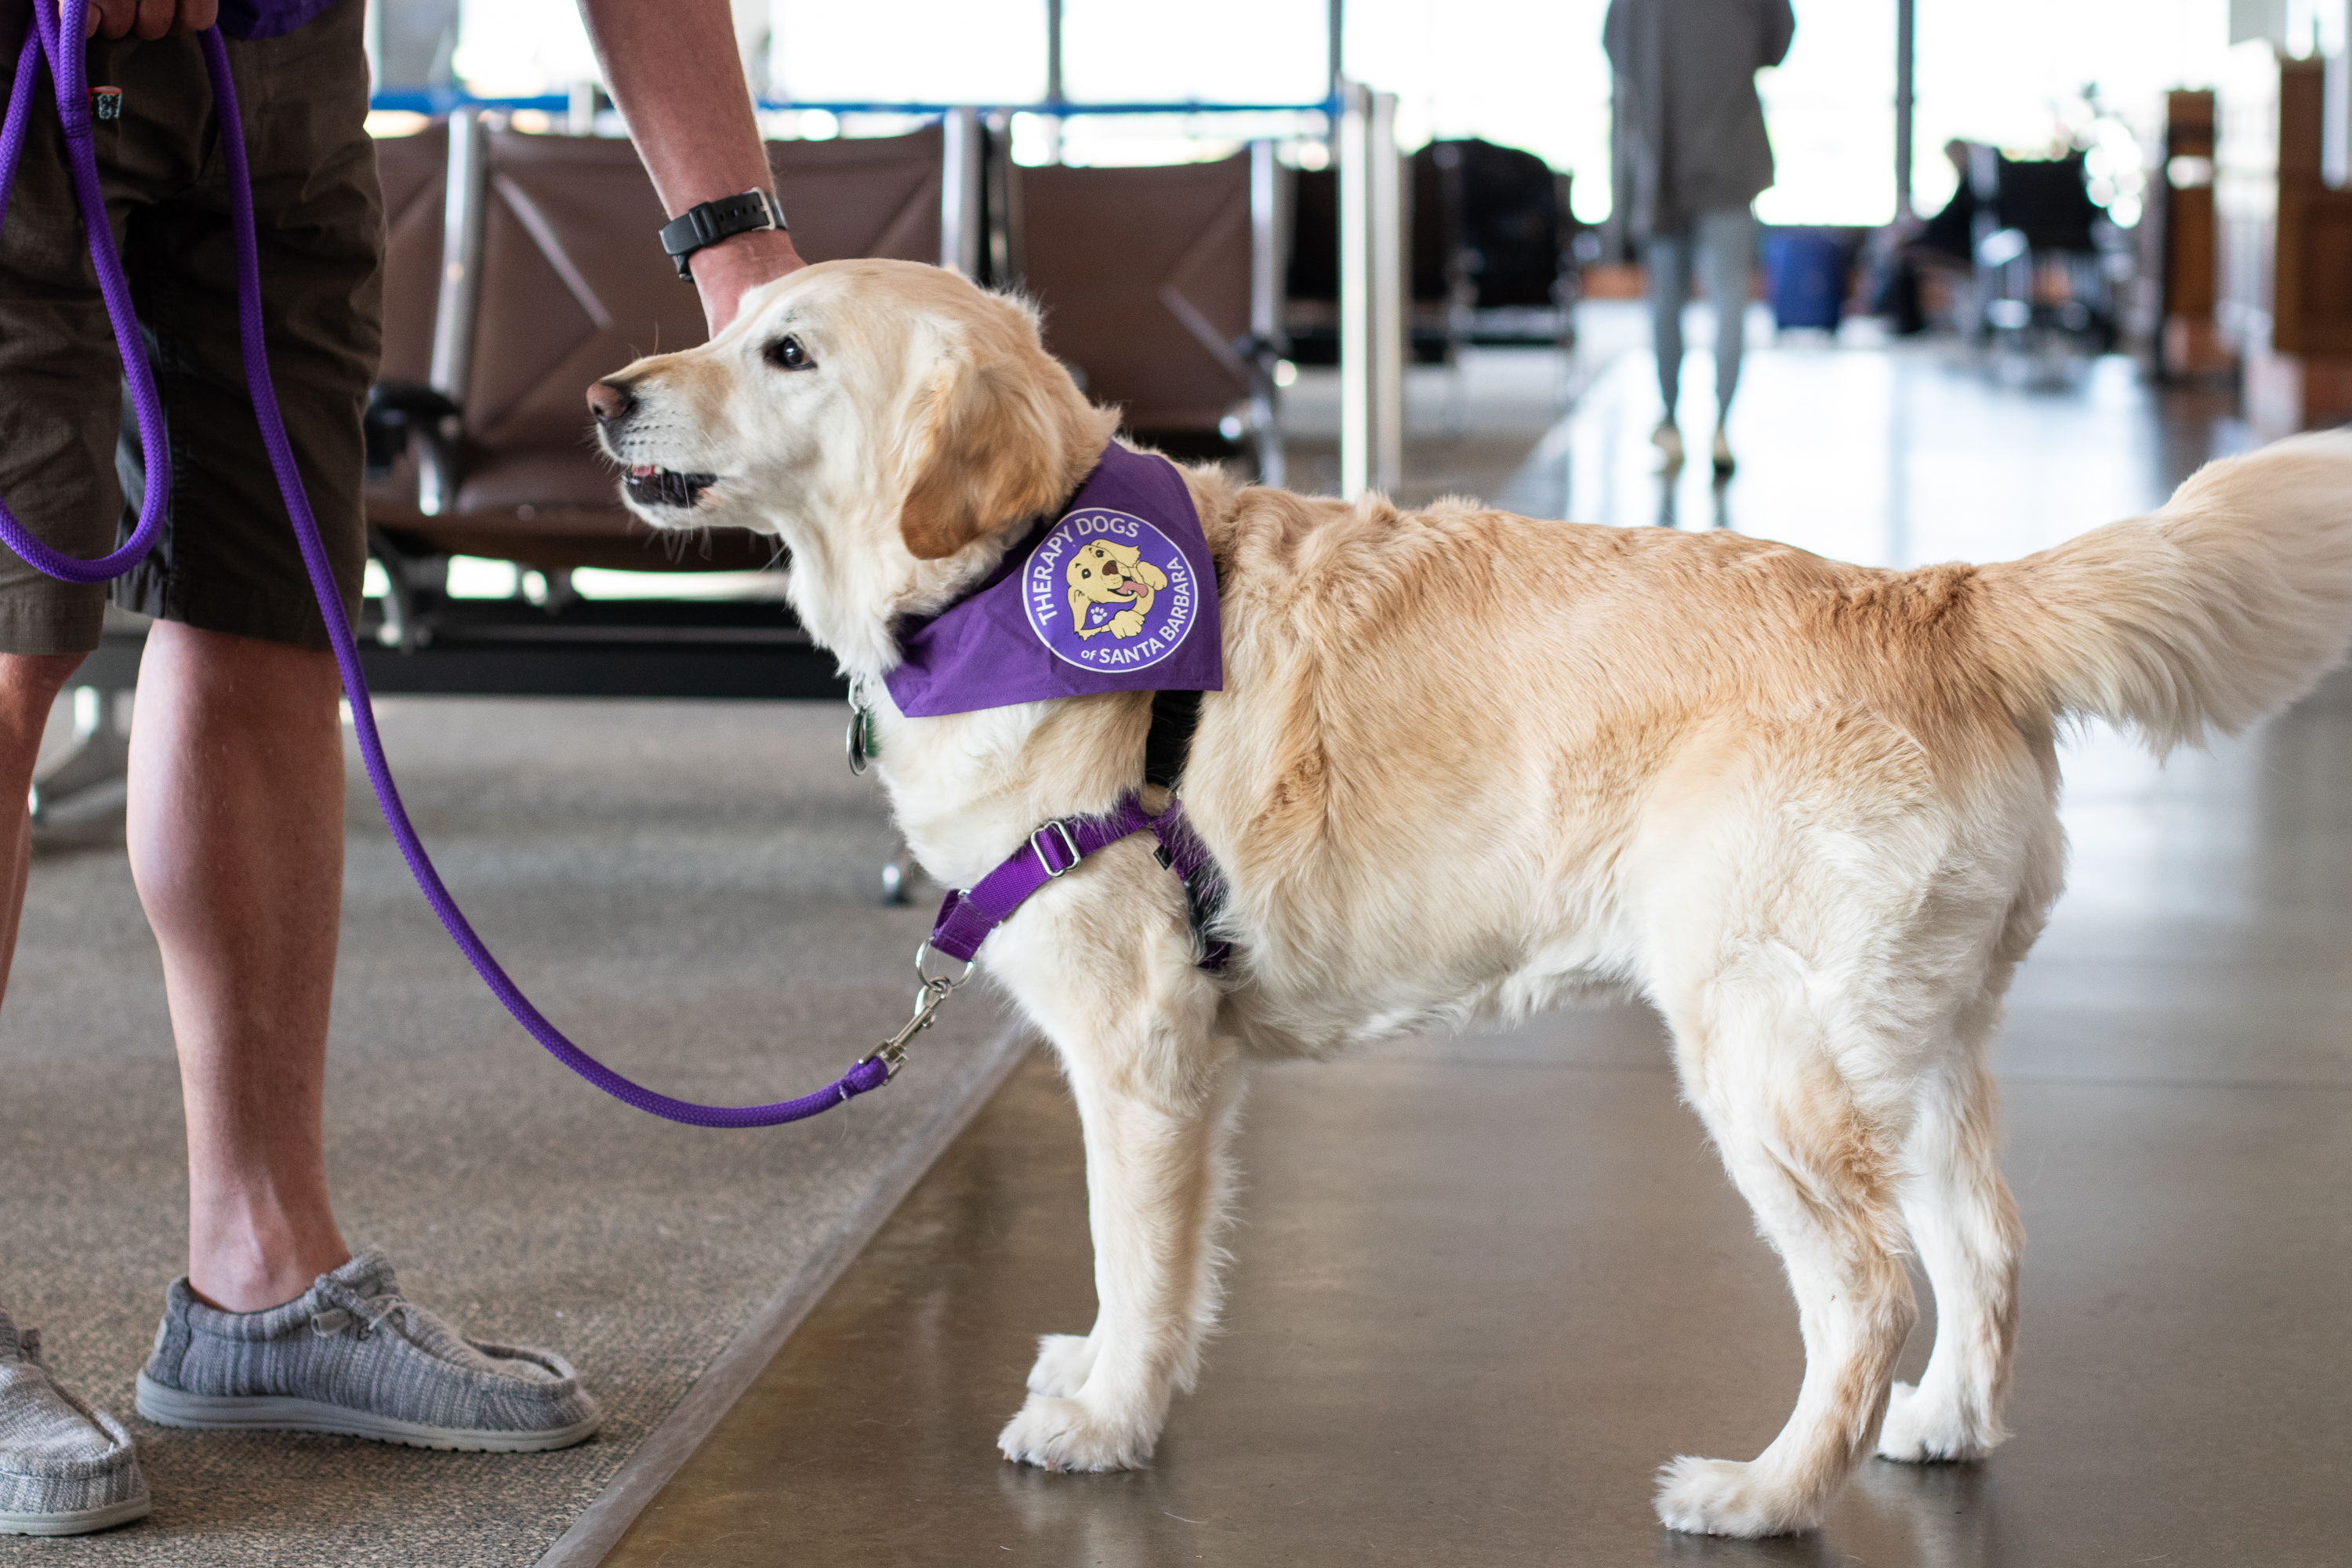 Therapy dog standing inside SBA Terminal